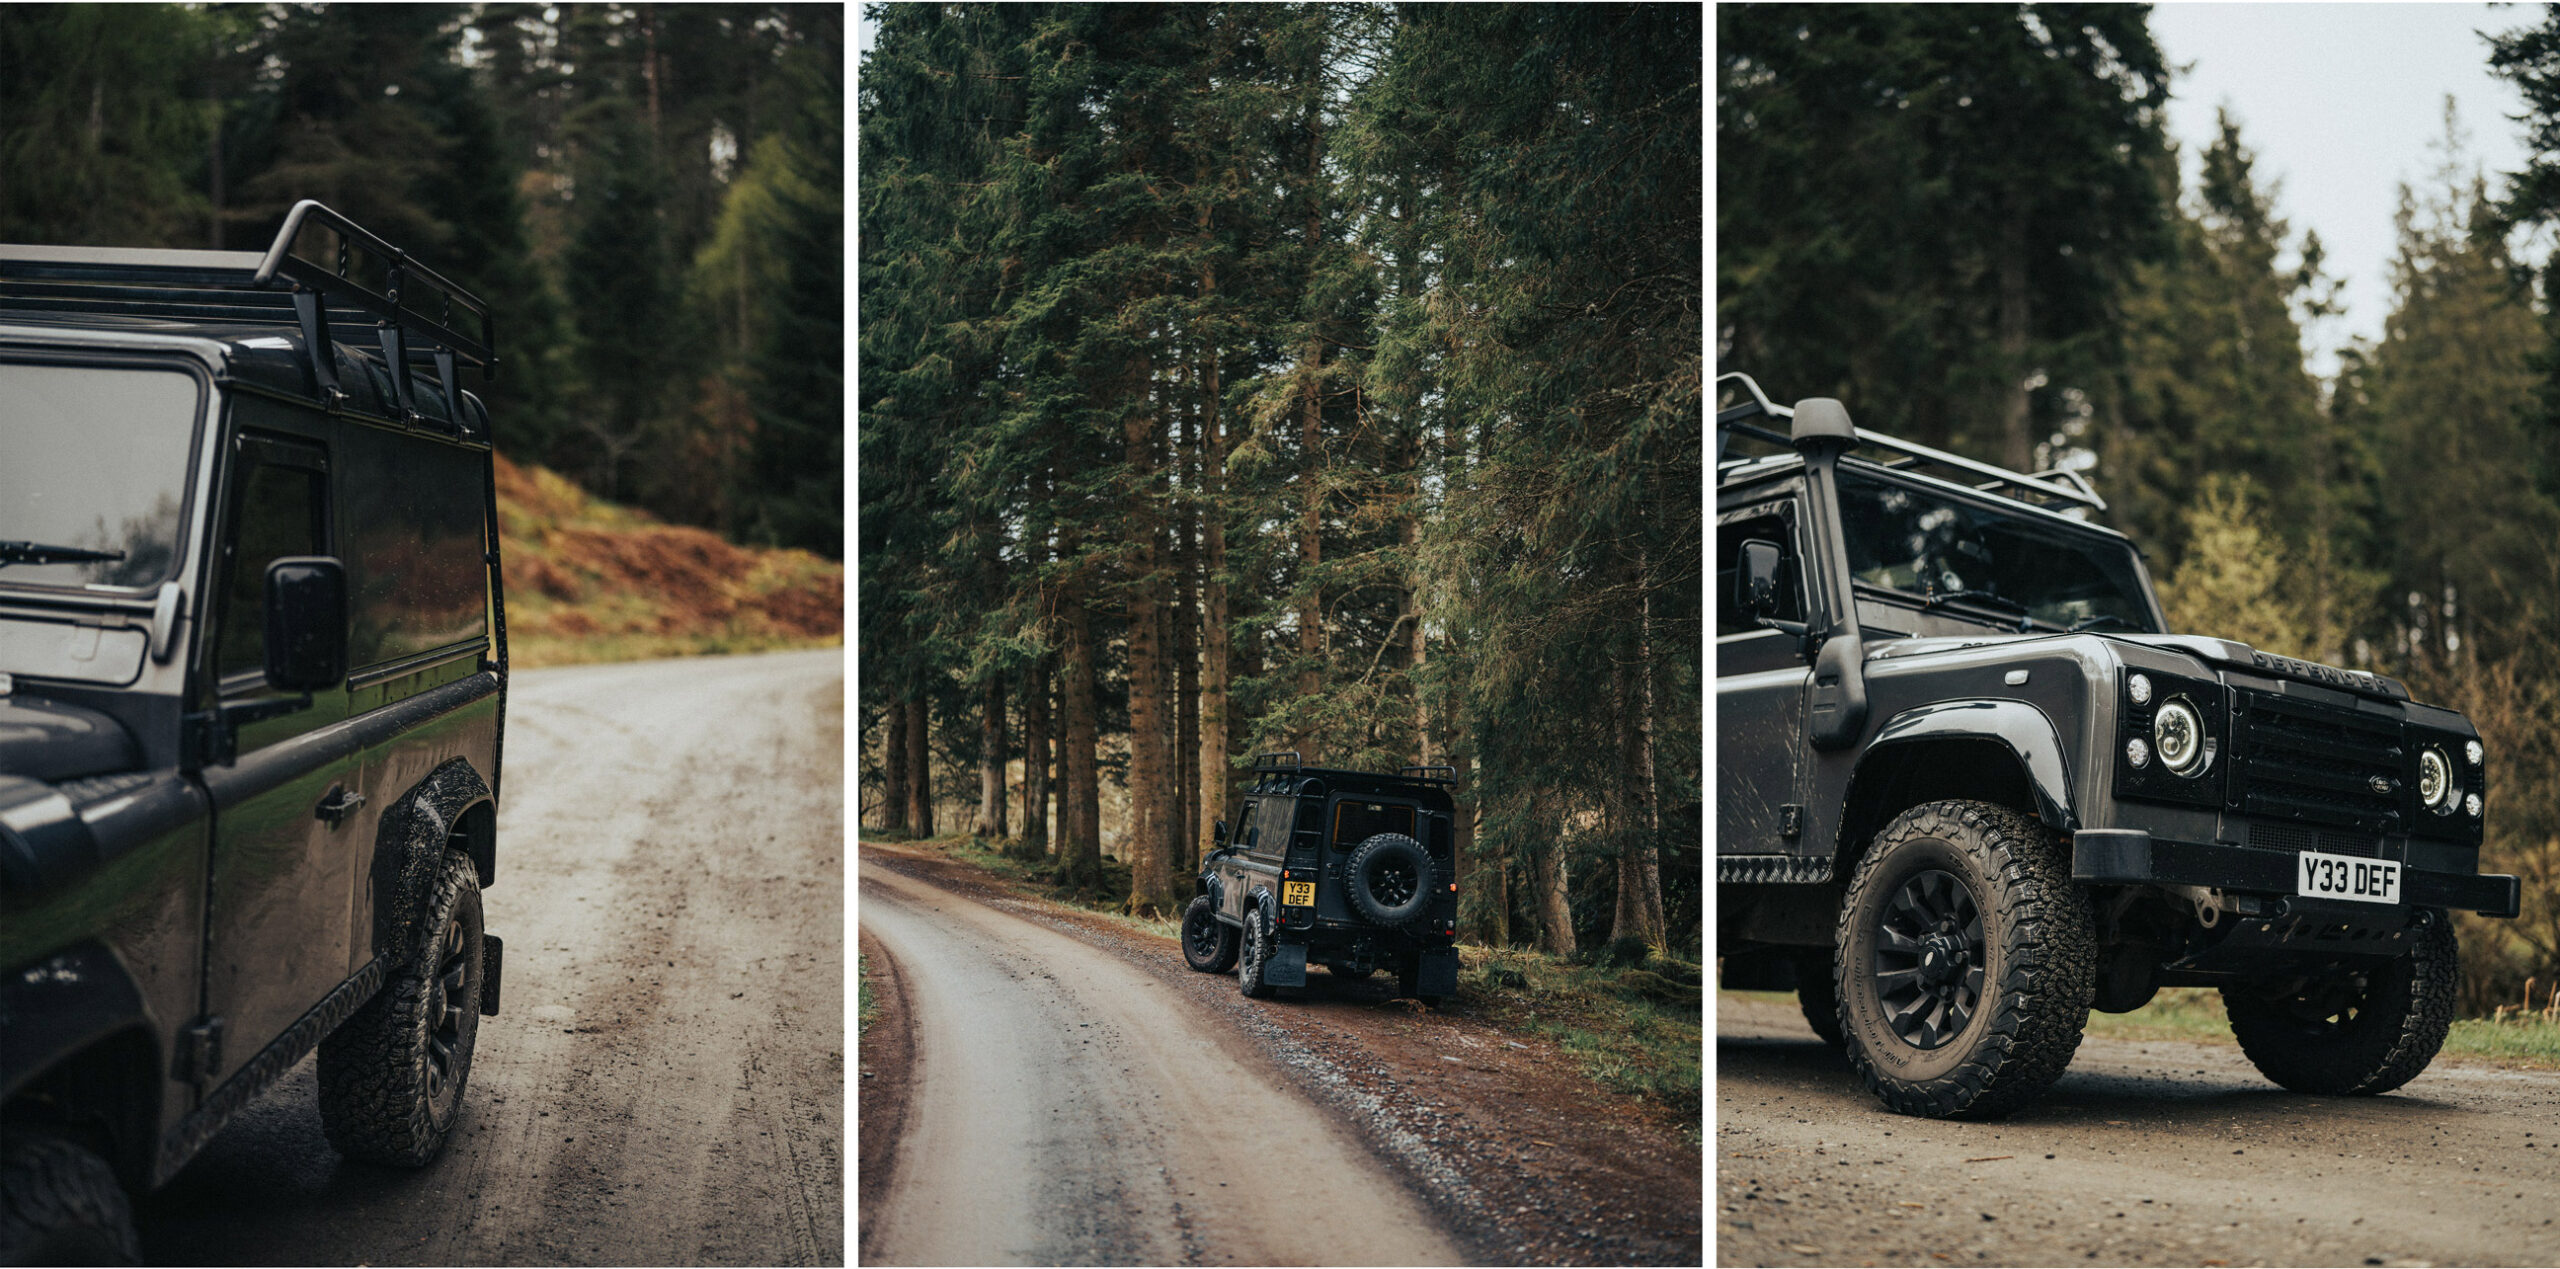 2001 Land Rover defender 90 parked on a forest road in Scotland